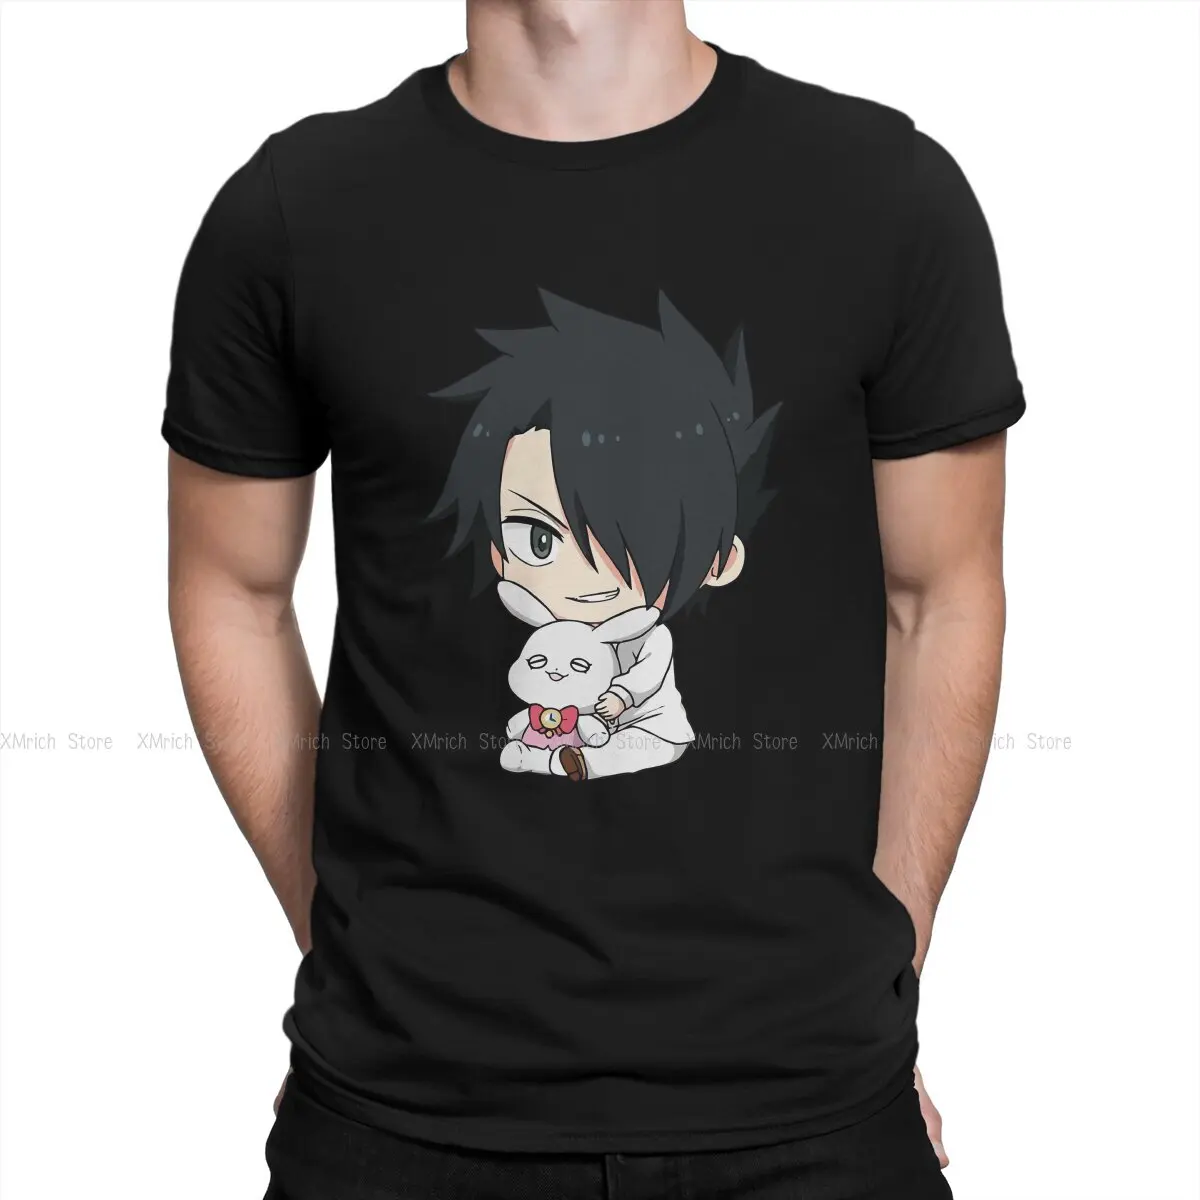 

Men's Ray T Shirts The Promised Neverland Anime Pure Cotton Clothing Funny Short Sleeve Crew Neck Tee Shirt Graphic T-Shirt